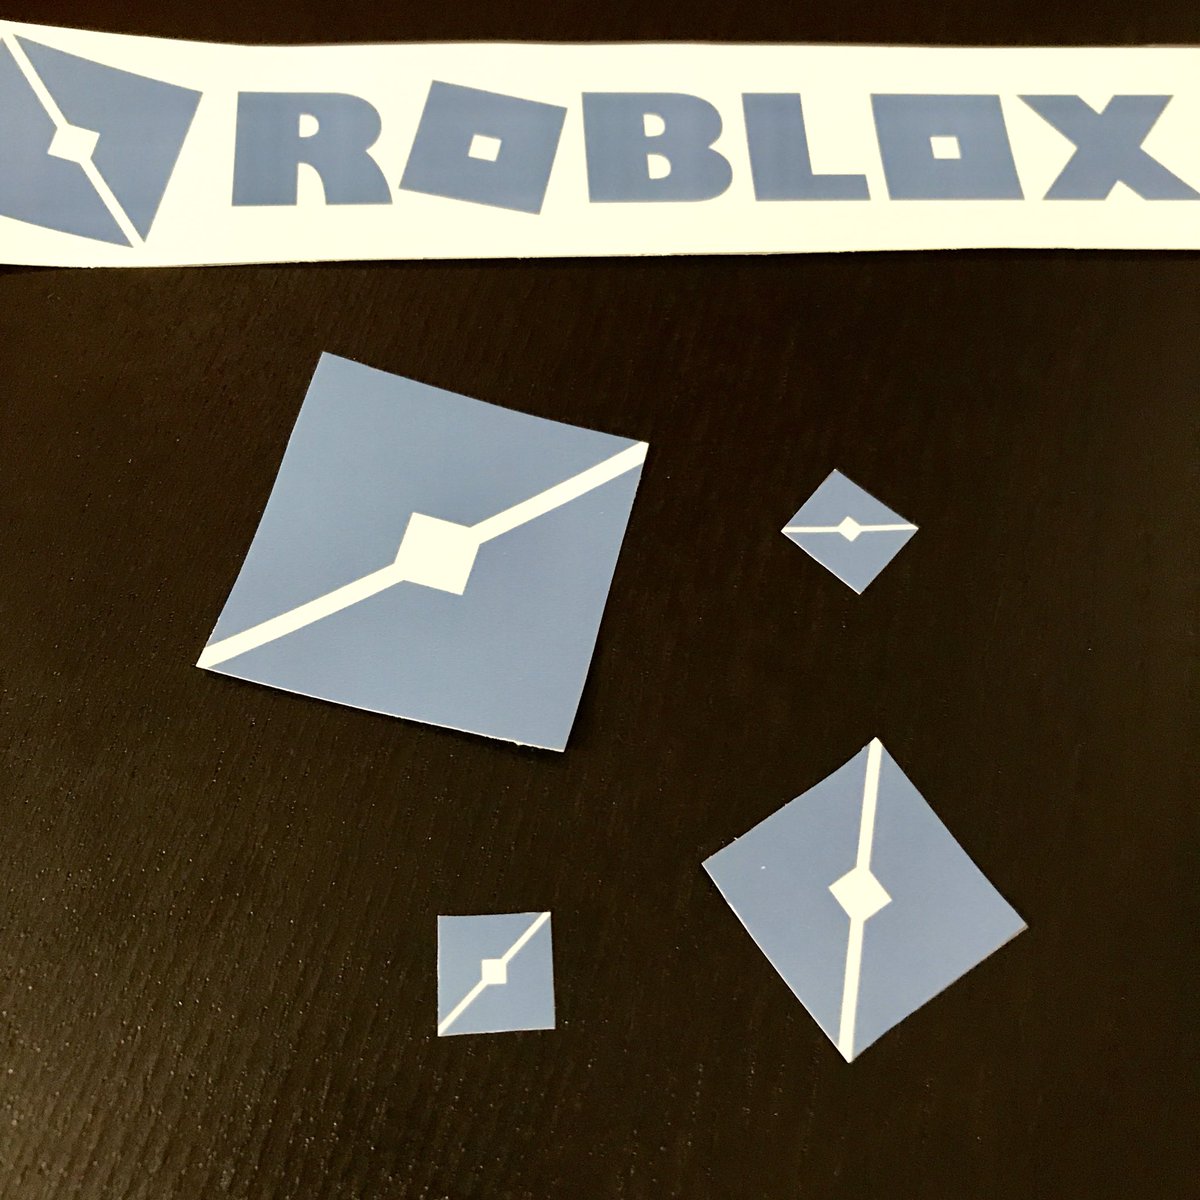 Ricky On Twitter The Roblox Studio Stickers Are Easy Enough To Make At Home Using Sticker Paper Https T Co 3f4xln3vu1